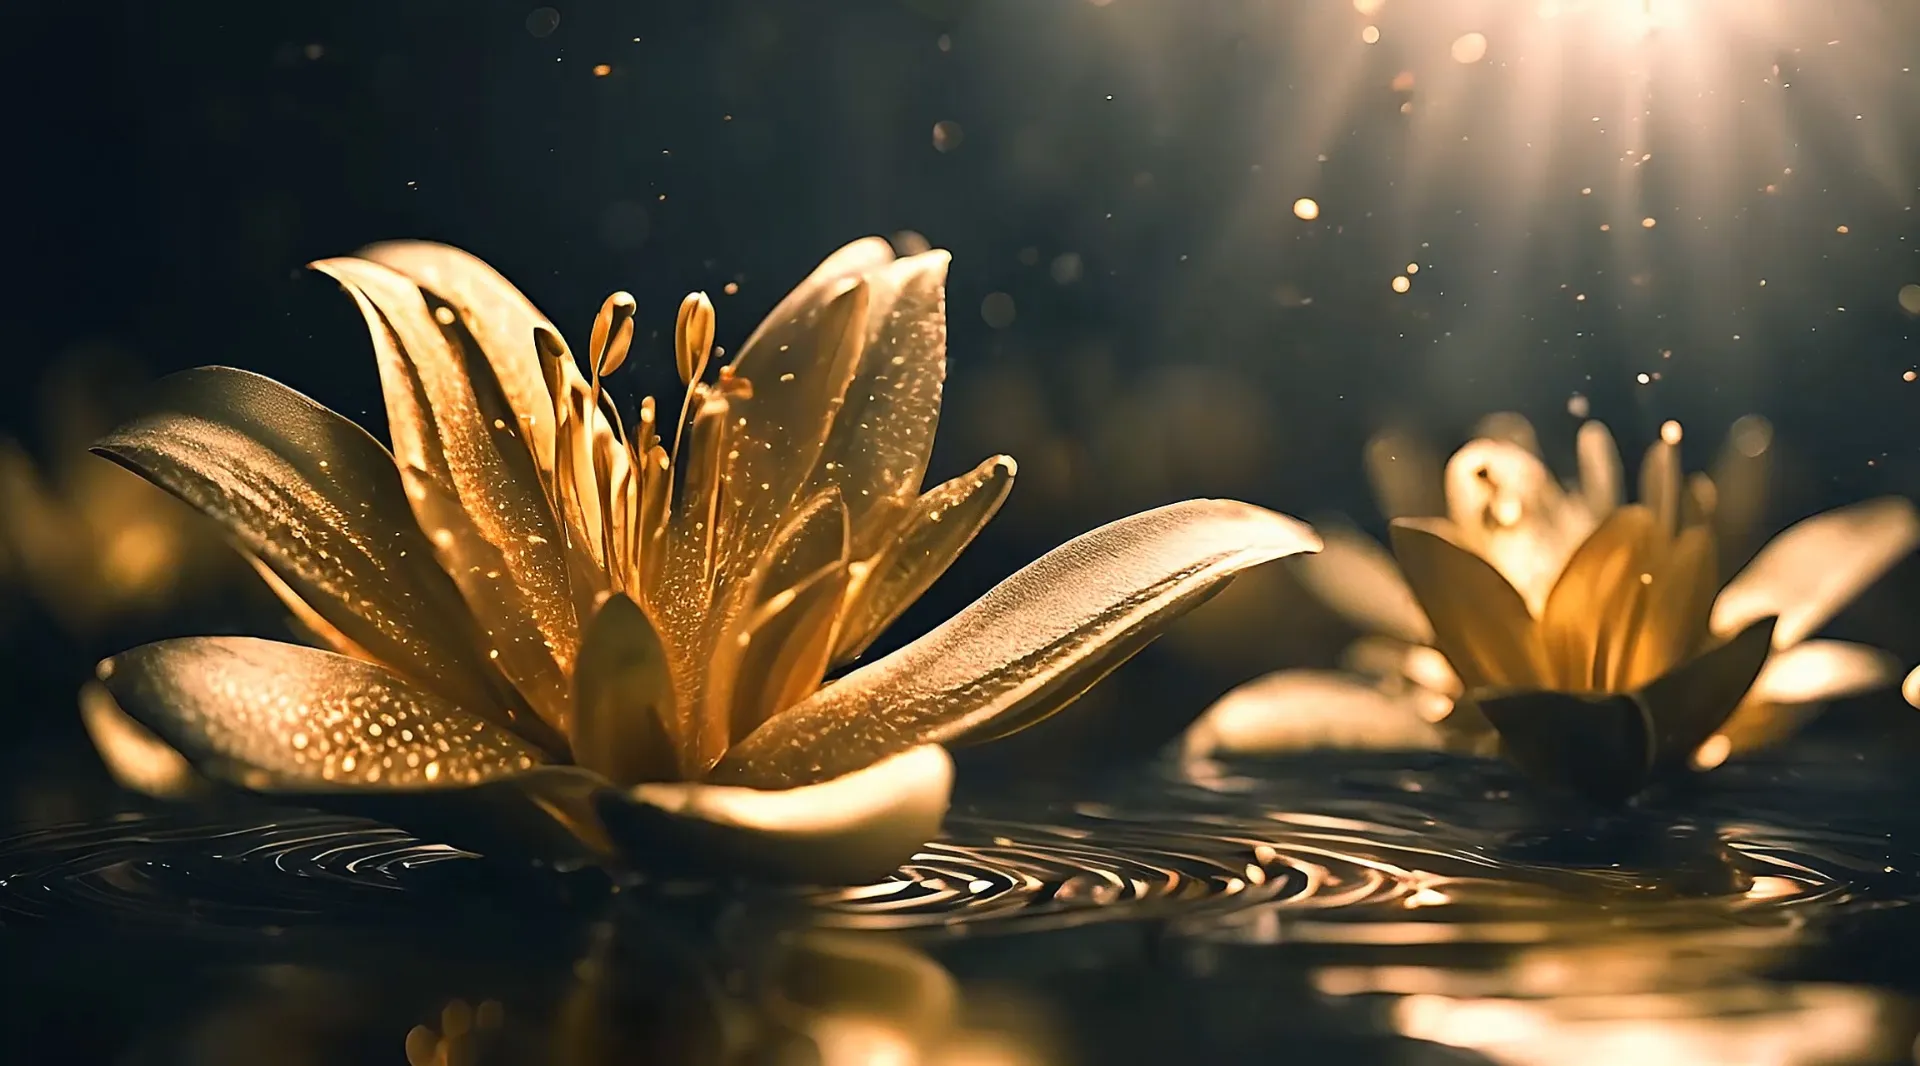 Golden Lotus Reflection Water Drops Video Clips